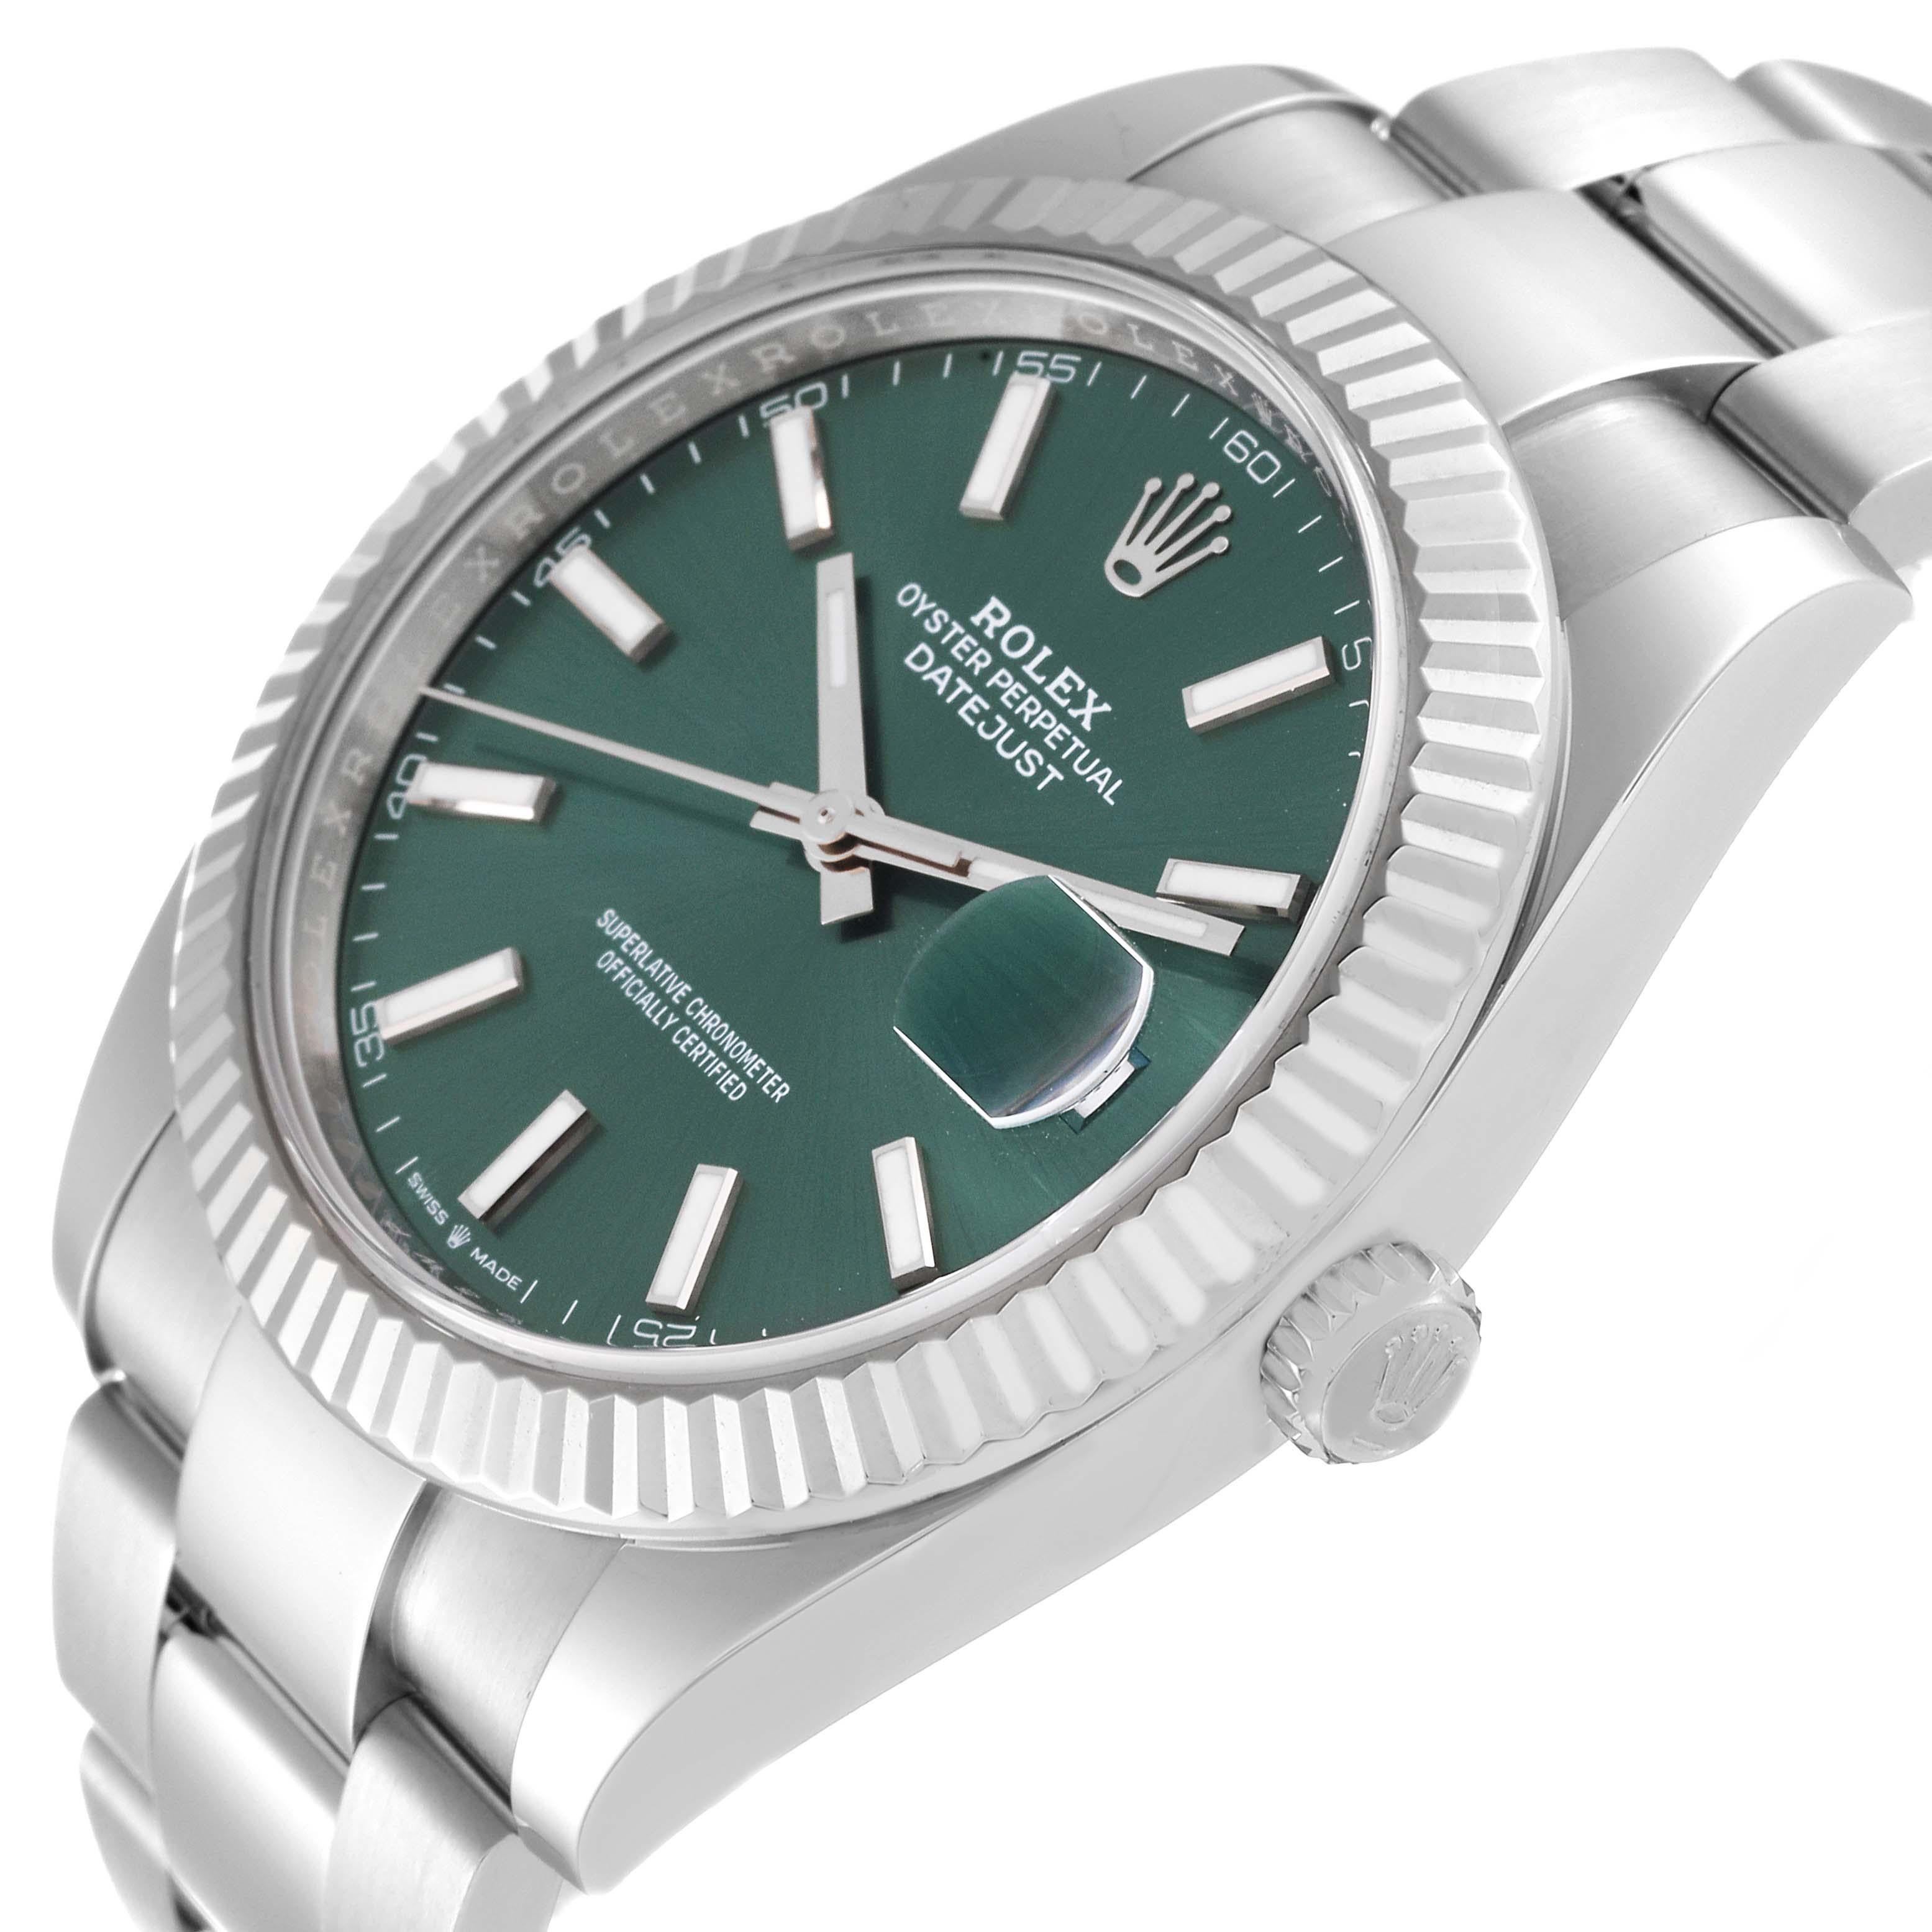 Rolex Datejust 41 Steel White Gold Mint Green Dial Mens Watch 126334 For Sale 1